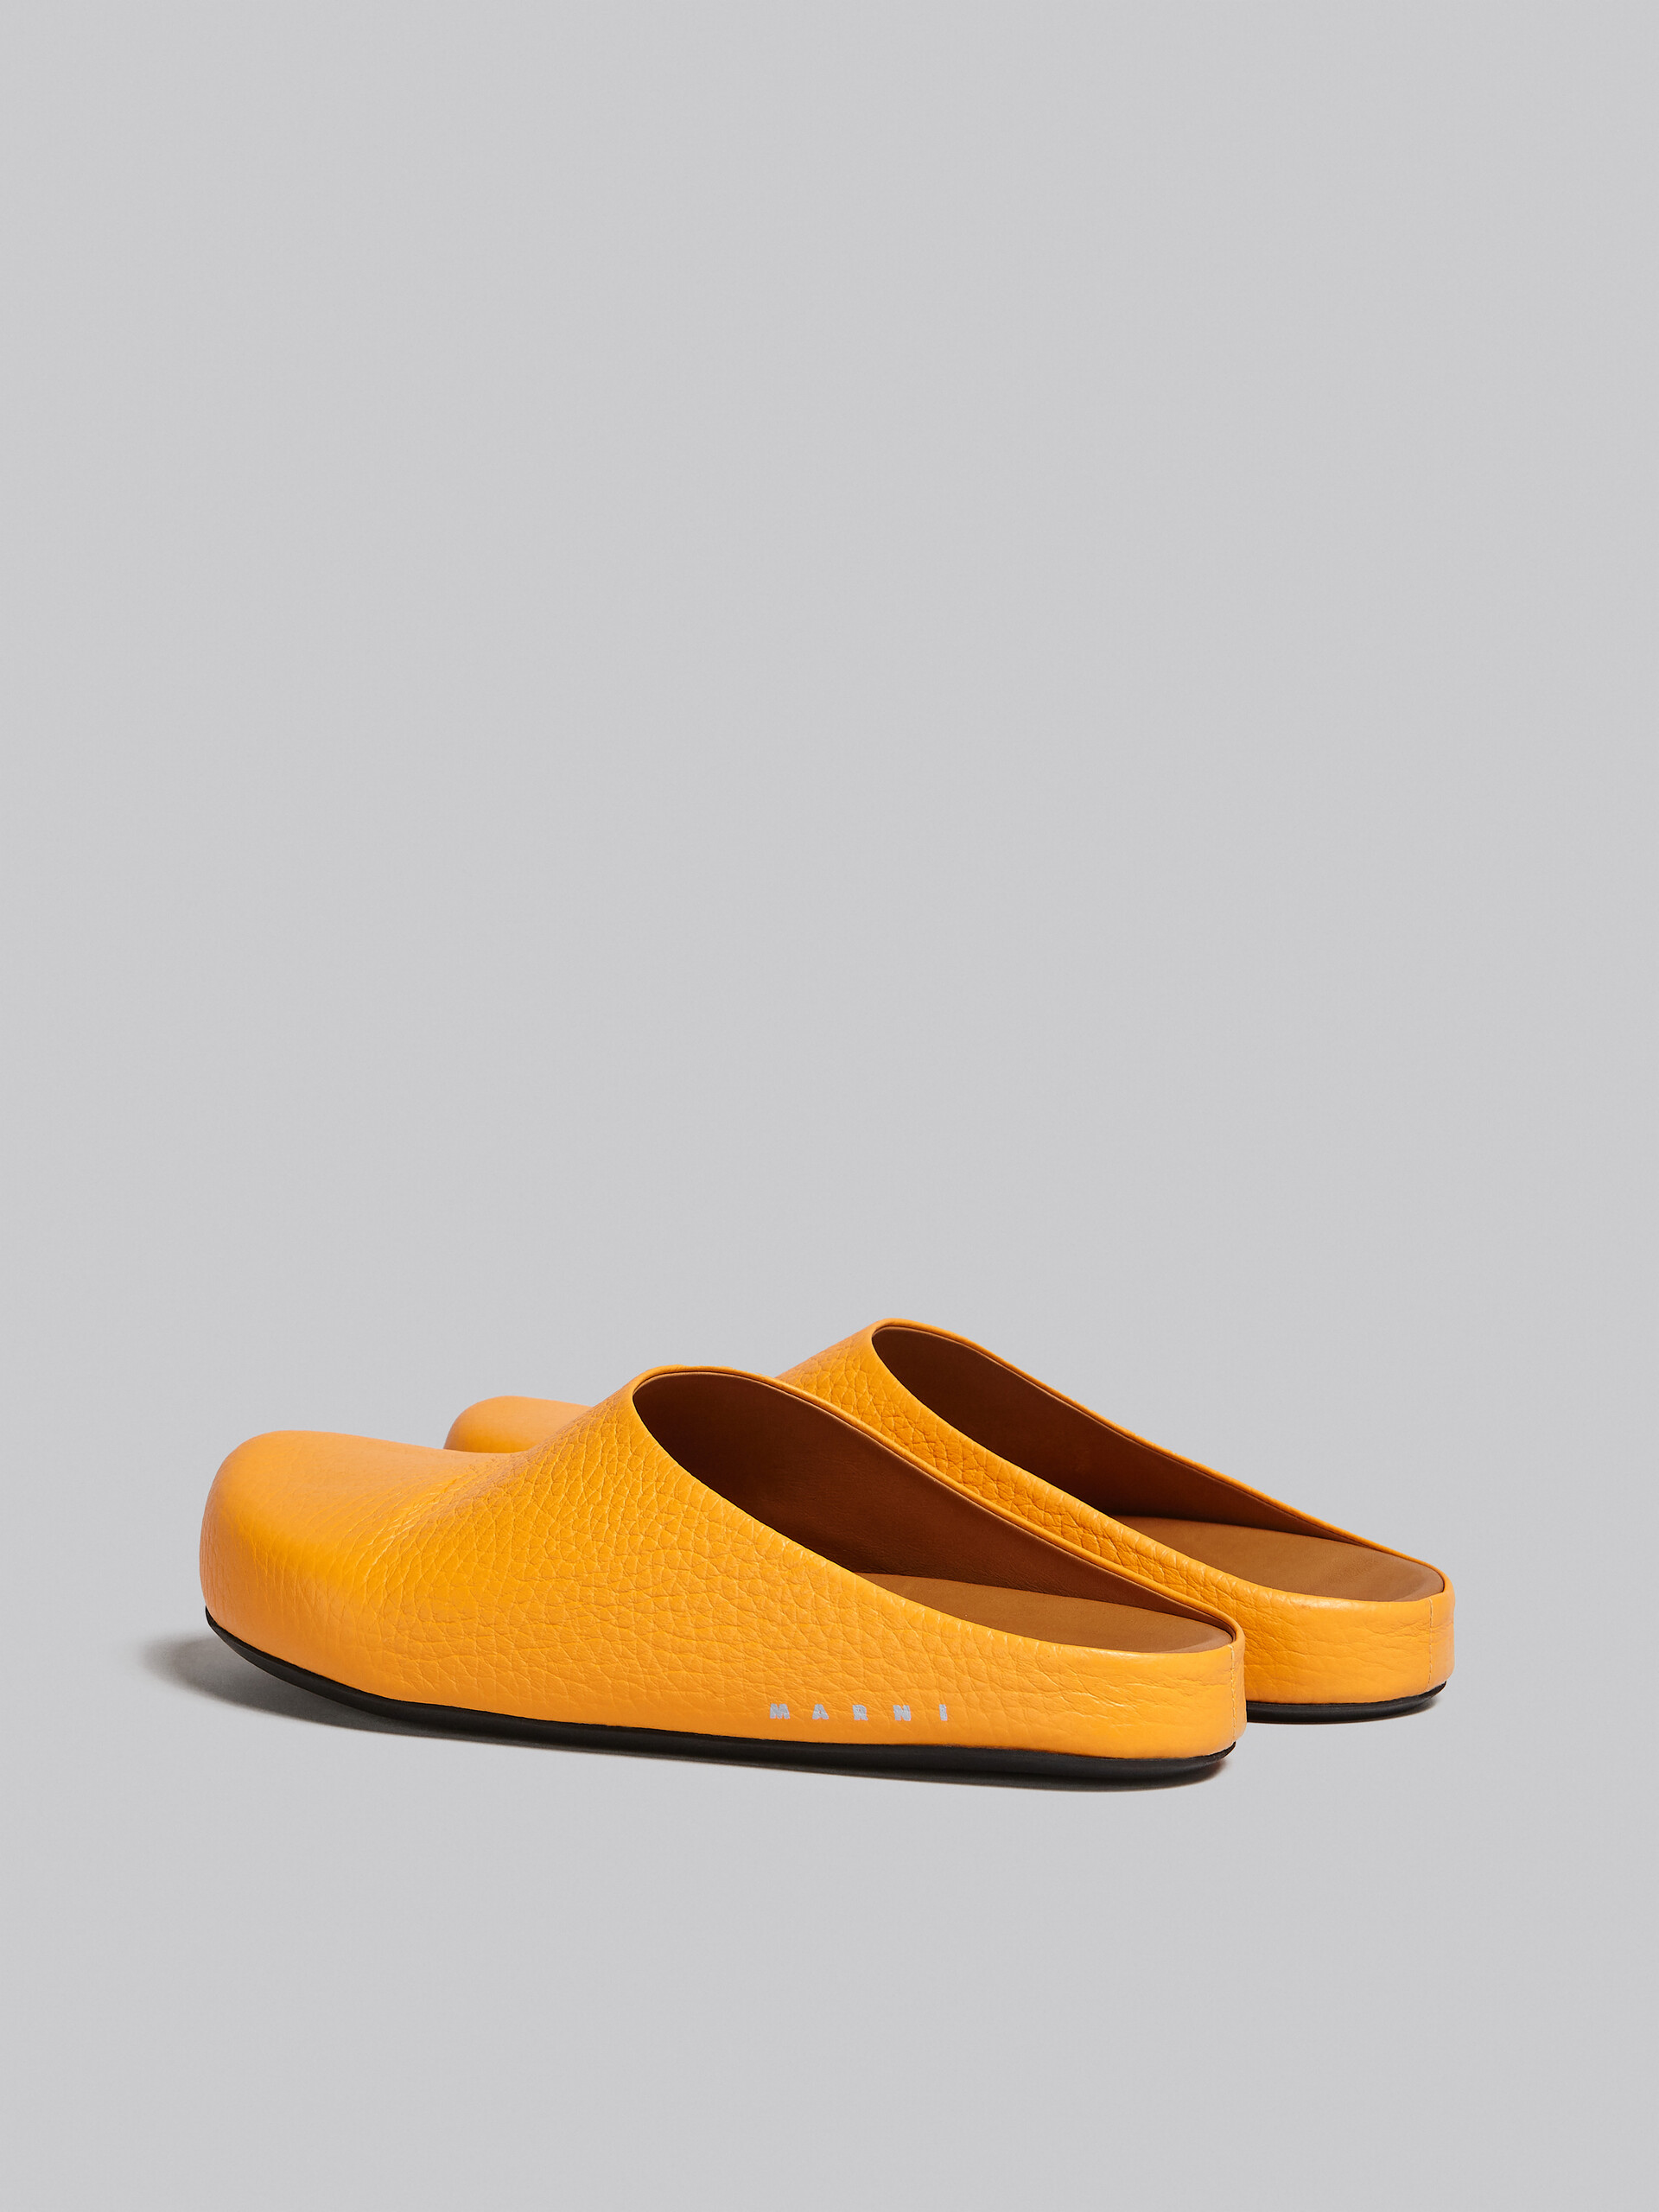 Yellow leather Fussbett sabot - Clogs - Image 3